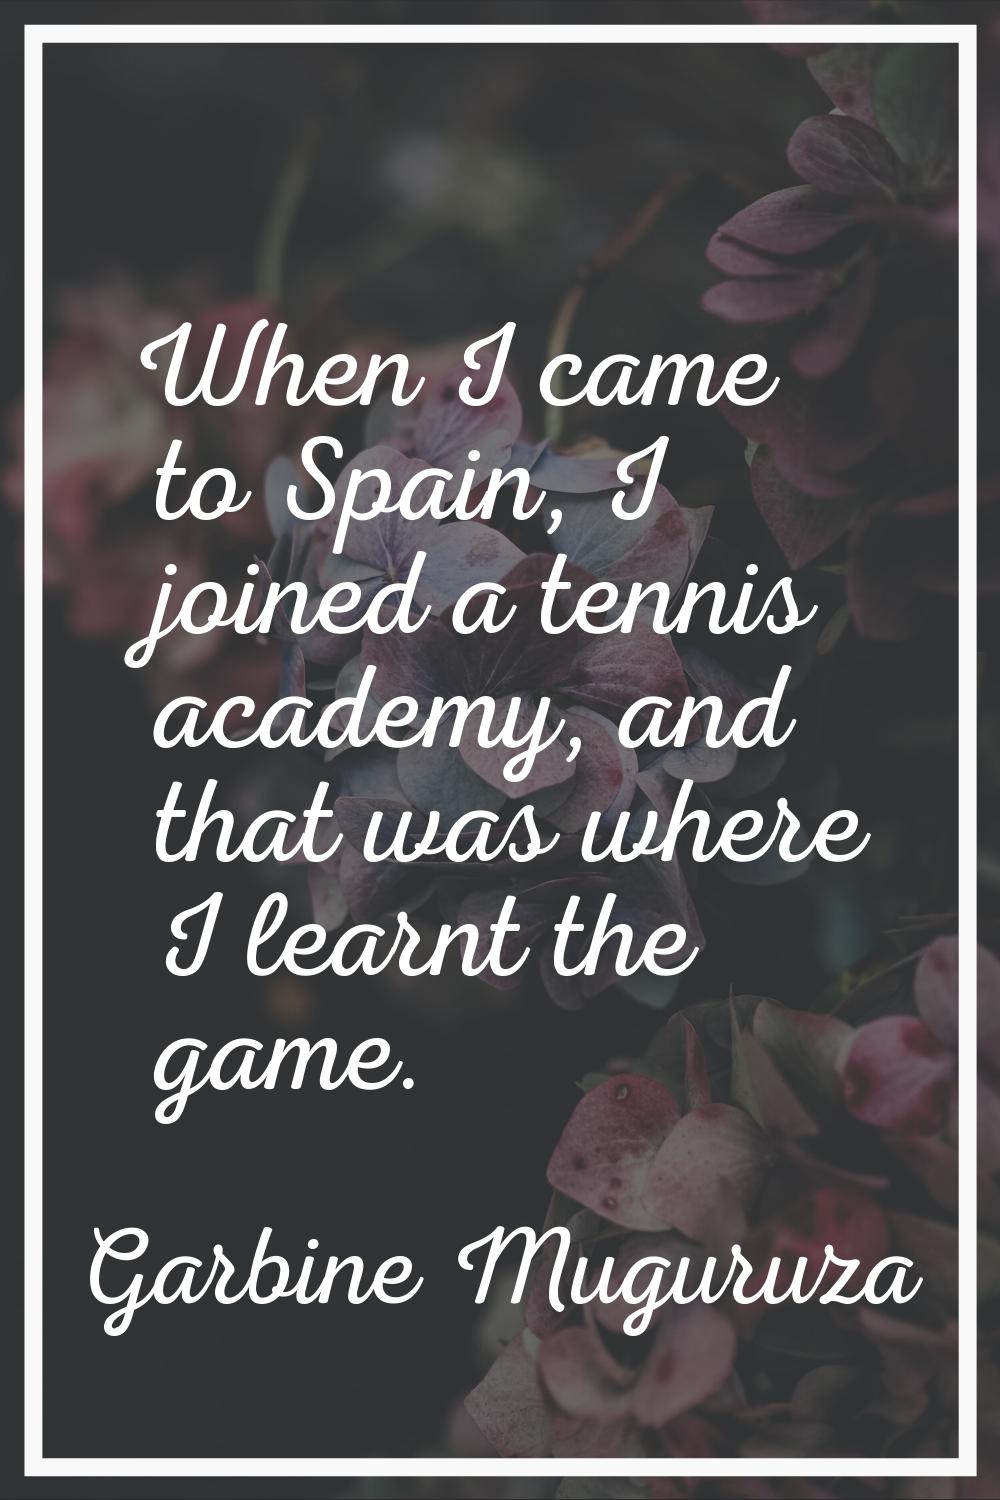 When I came to Spain, I joined a tennis academy, and that was where I learnt the game.